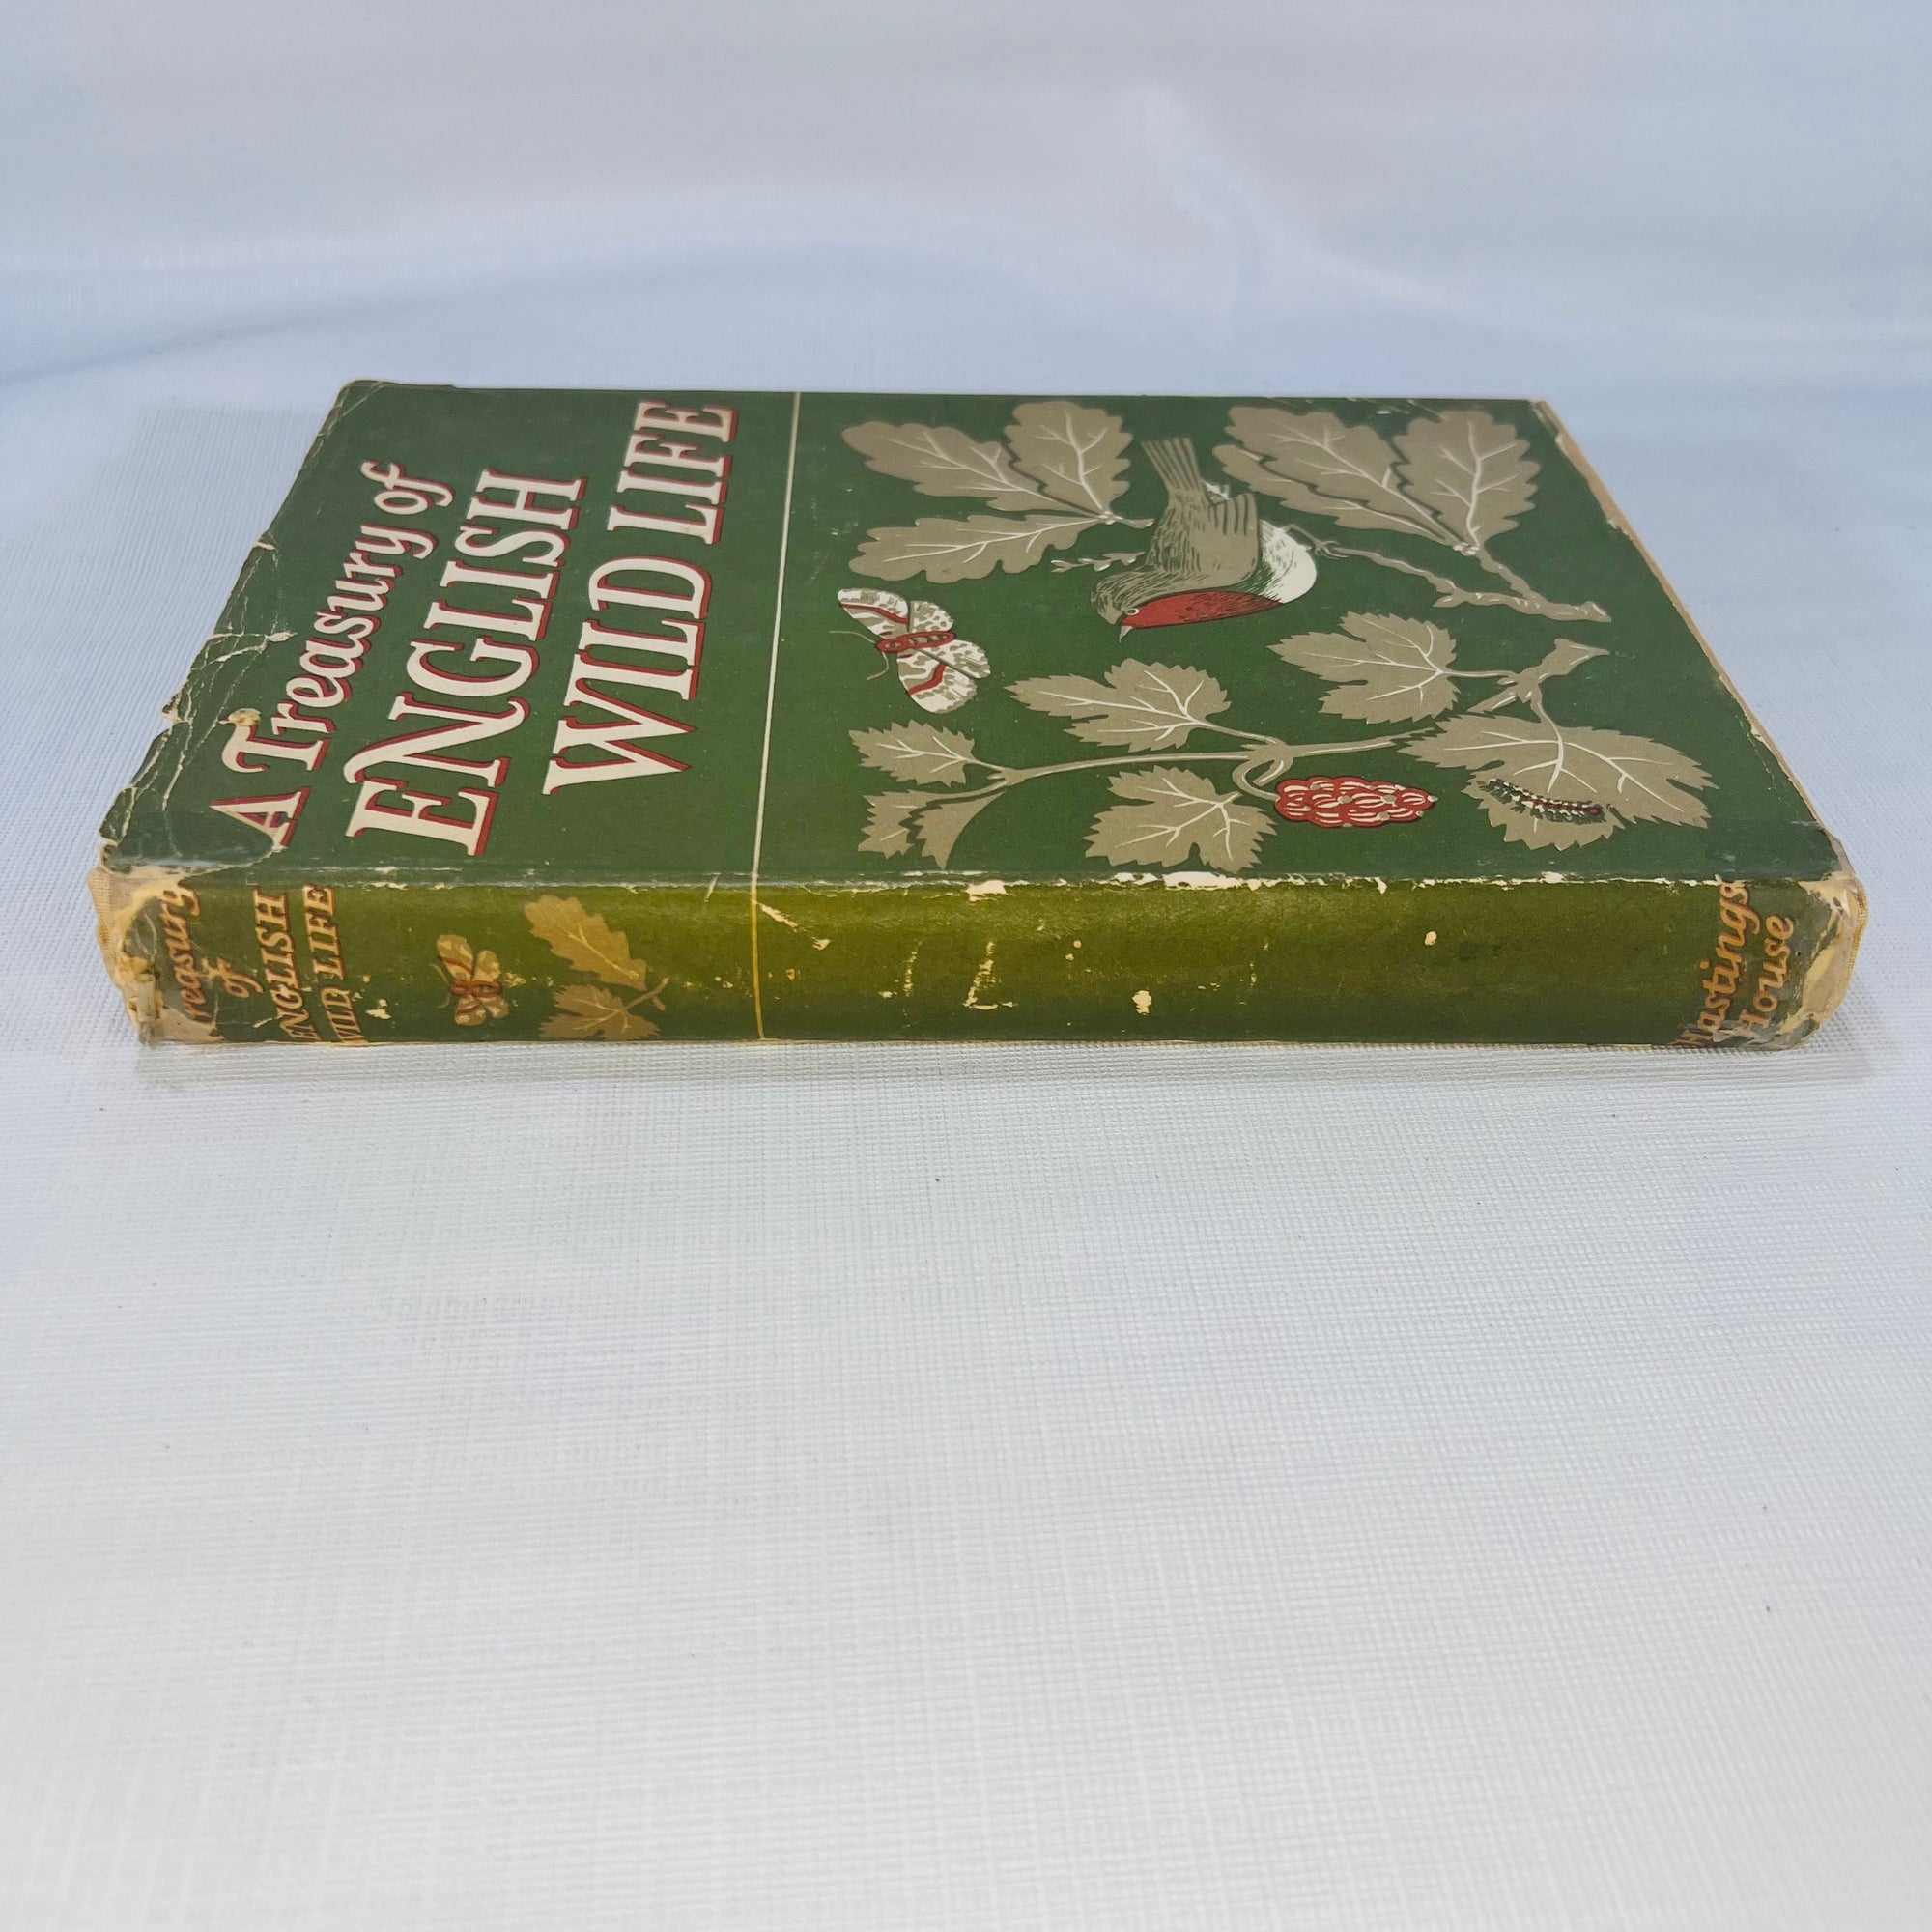 A Treasury of English Wild Life edited by W.J. Turner with 48 Plates in Color 113 illustrations in B/W Chanticleer Press New York